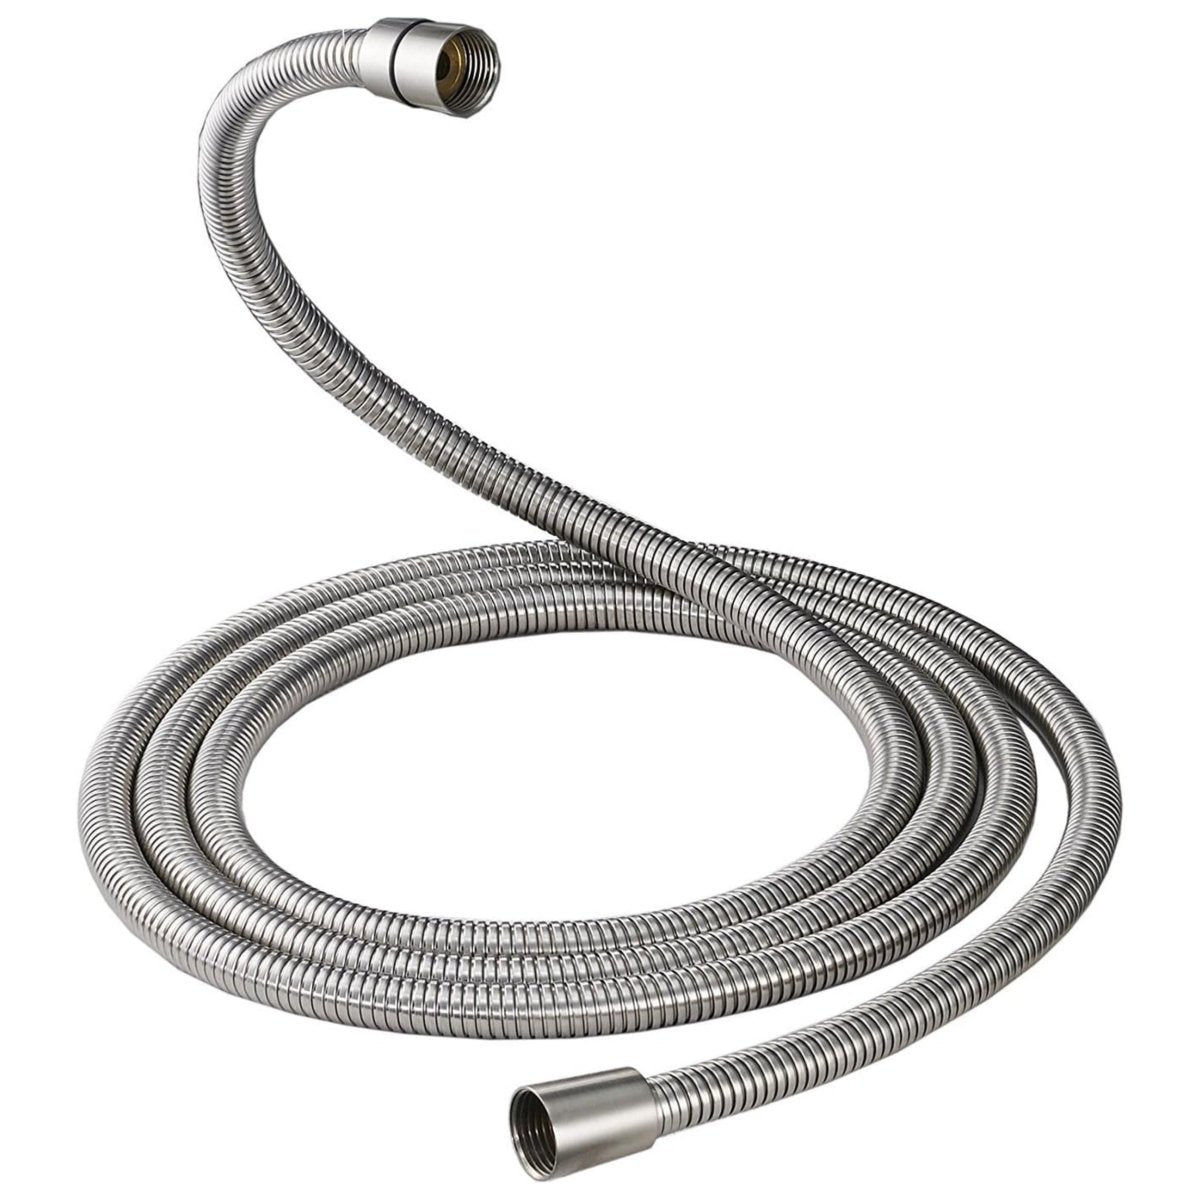 100 Inch Replacement Handheld Shower Hose Brushed Nickel - buyfaucet.com